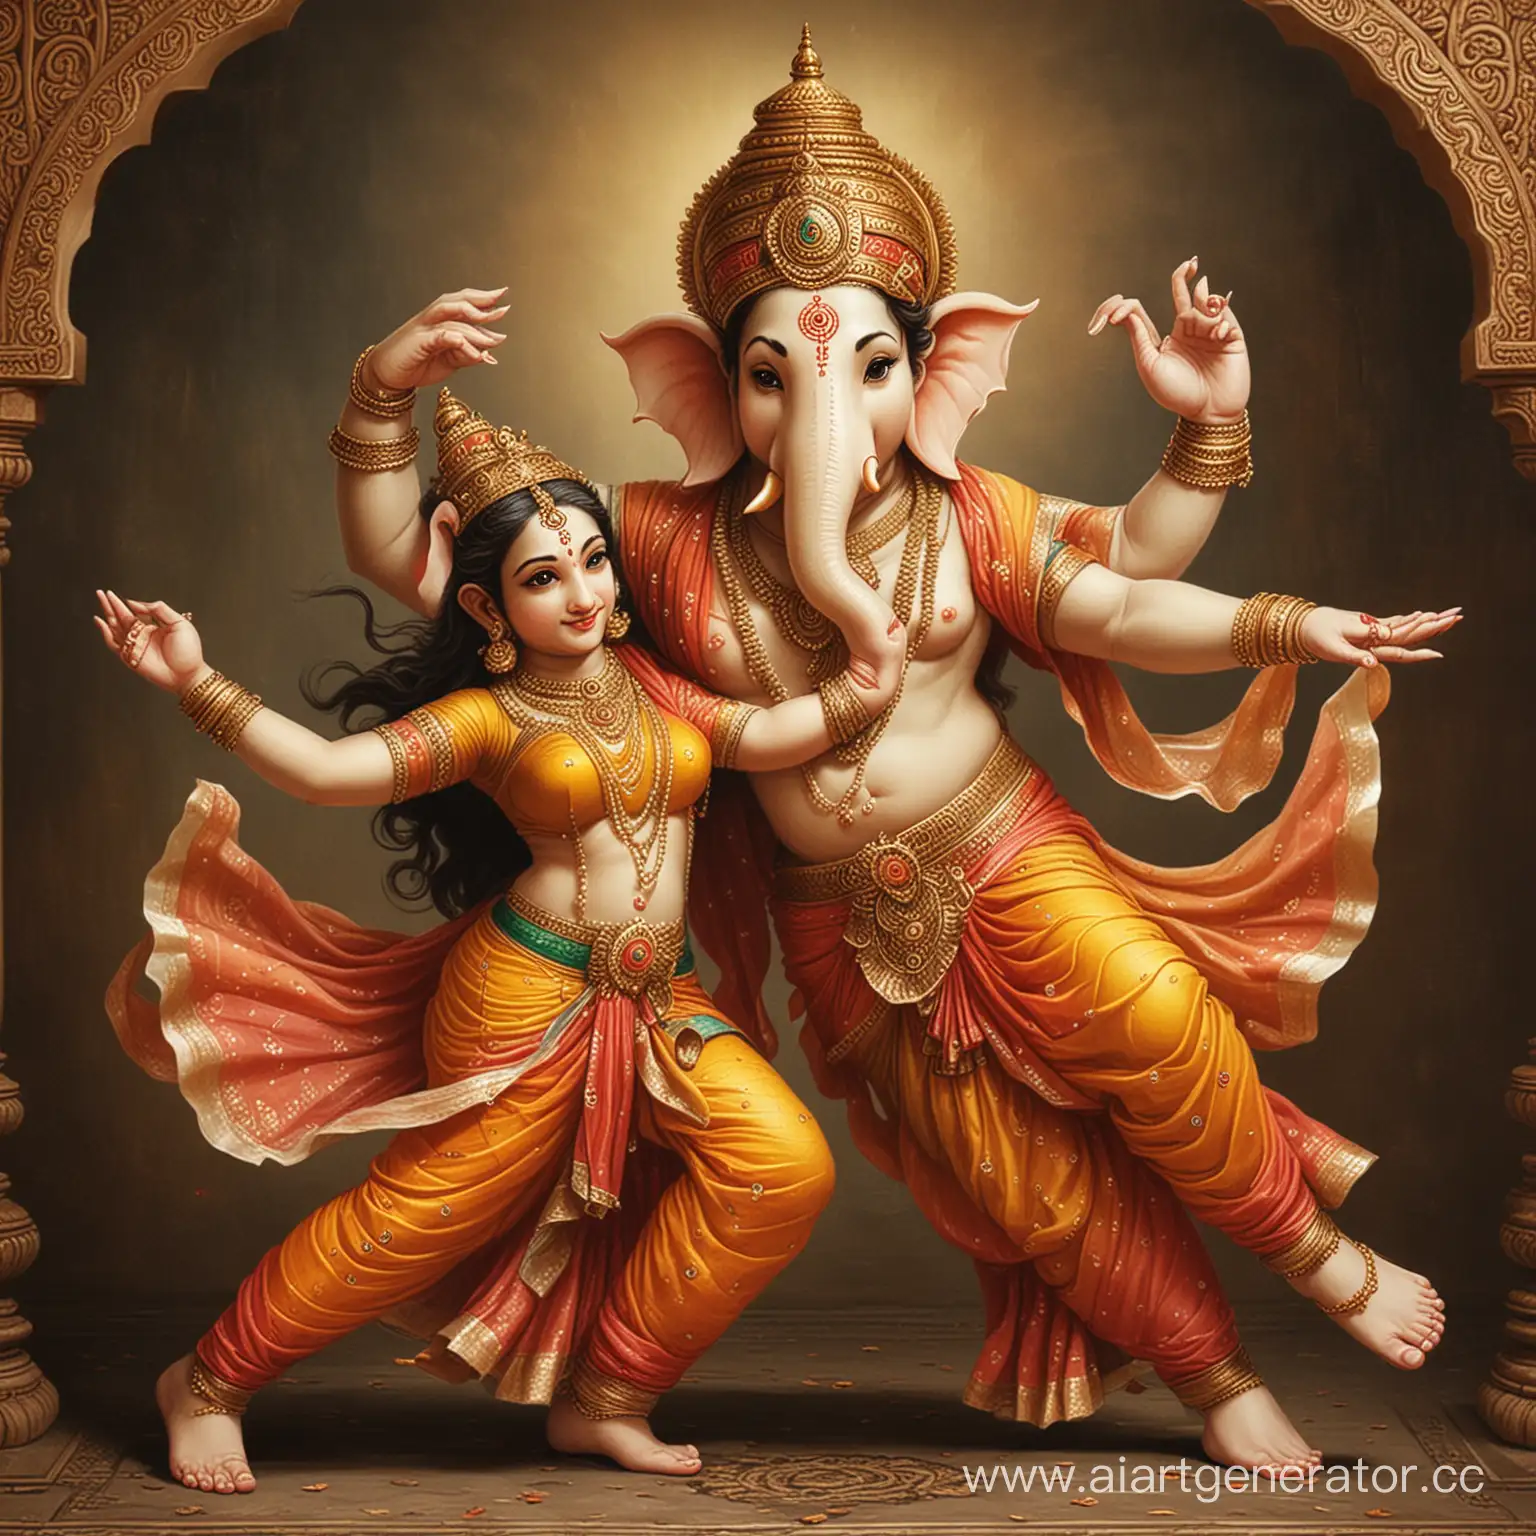 Lord Ganesha dancing with a woman